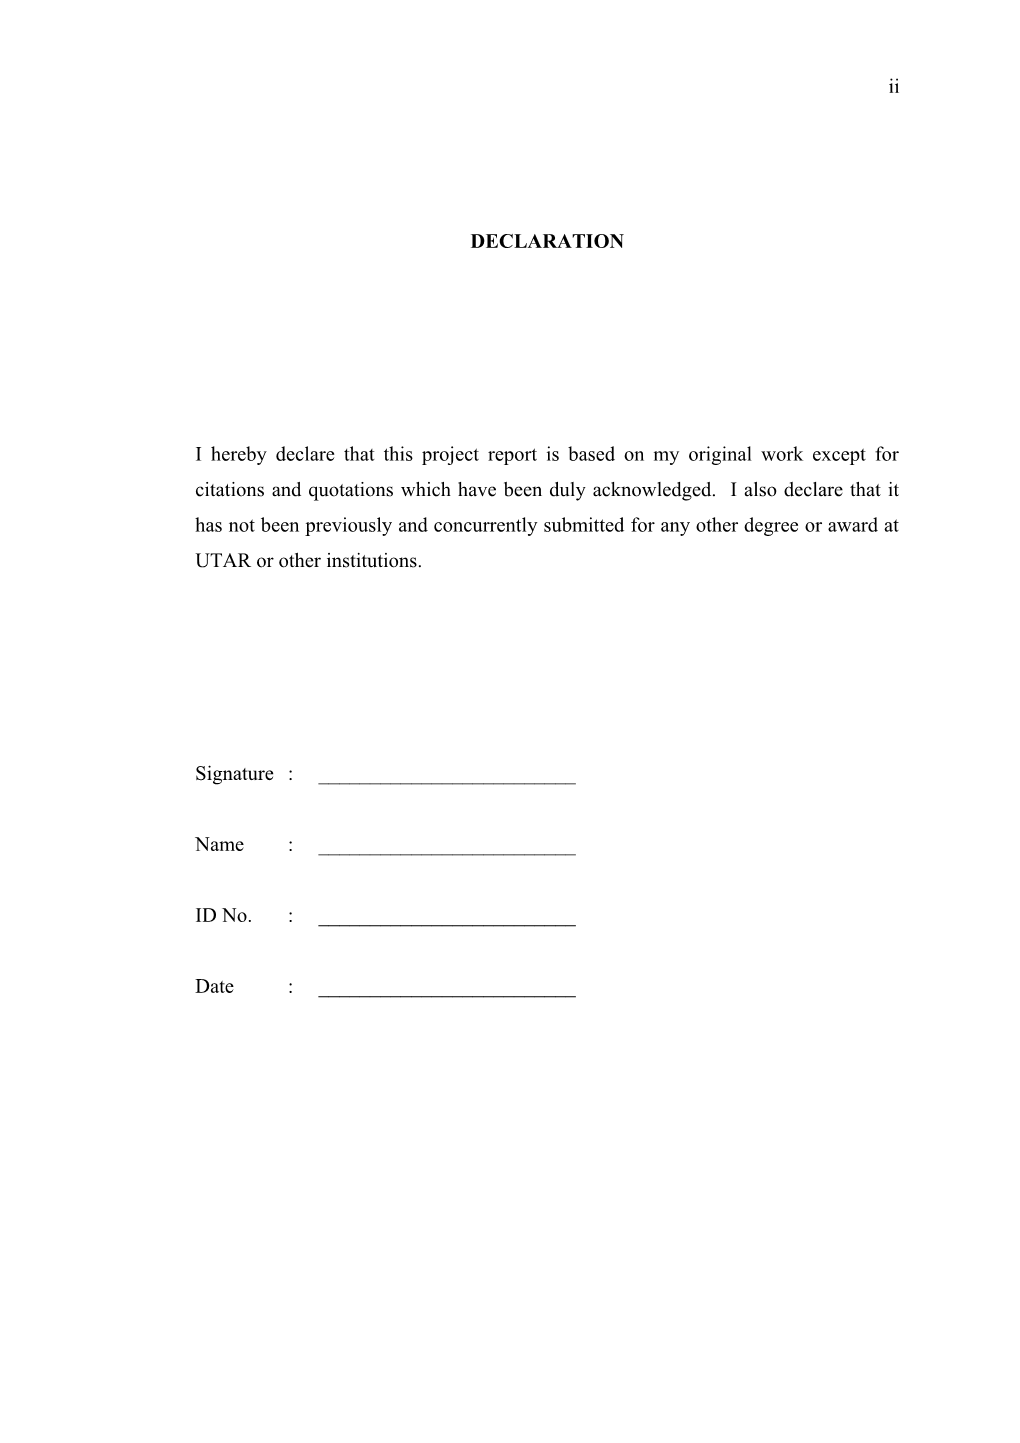 FEGT Final Year Project Template